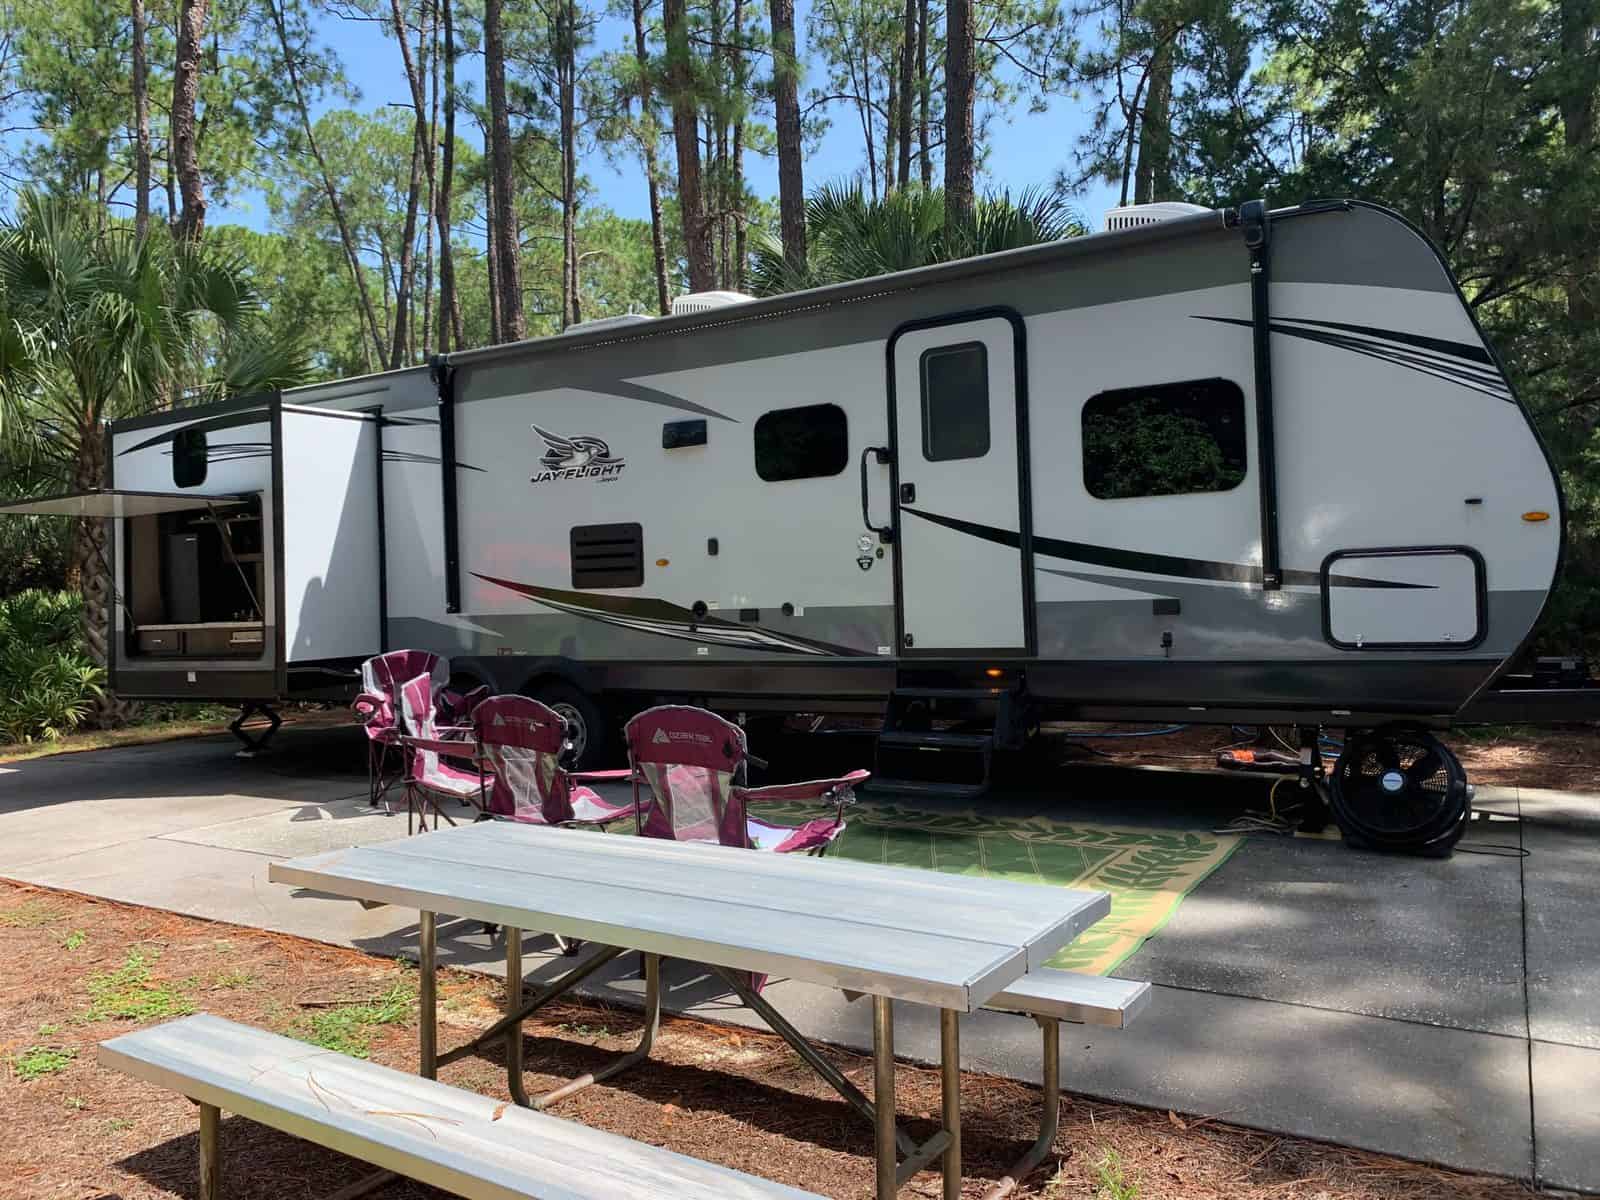 How to rent a camper at Disney’s Fort Wilderness (w/tips and a review)